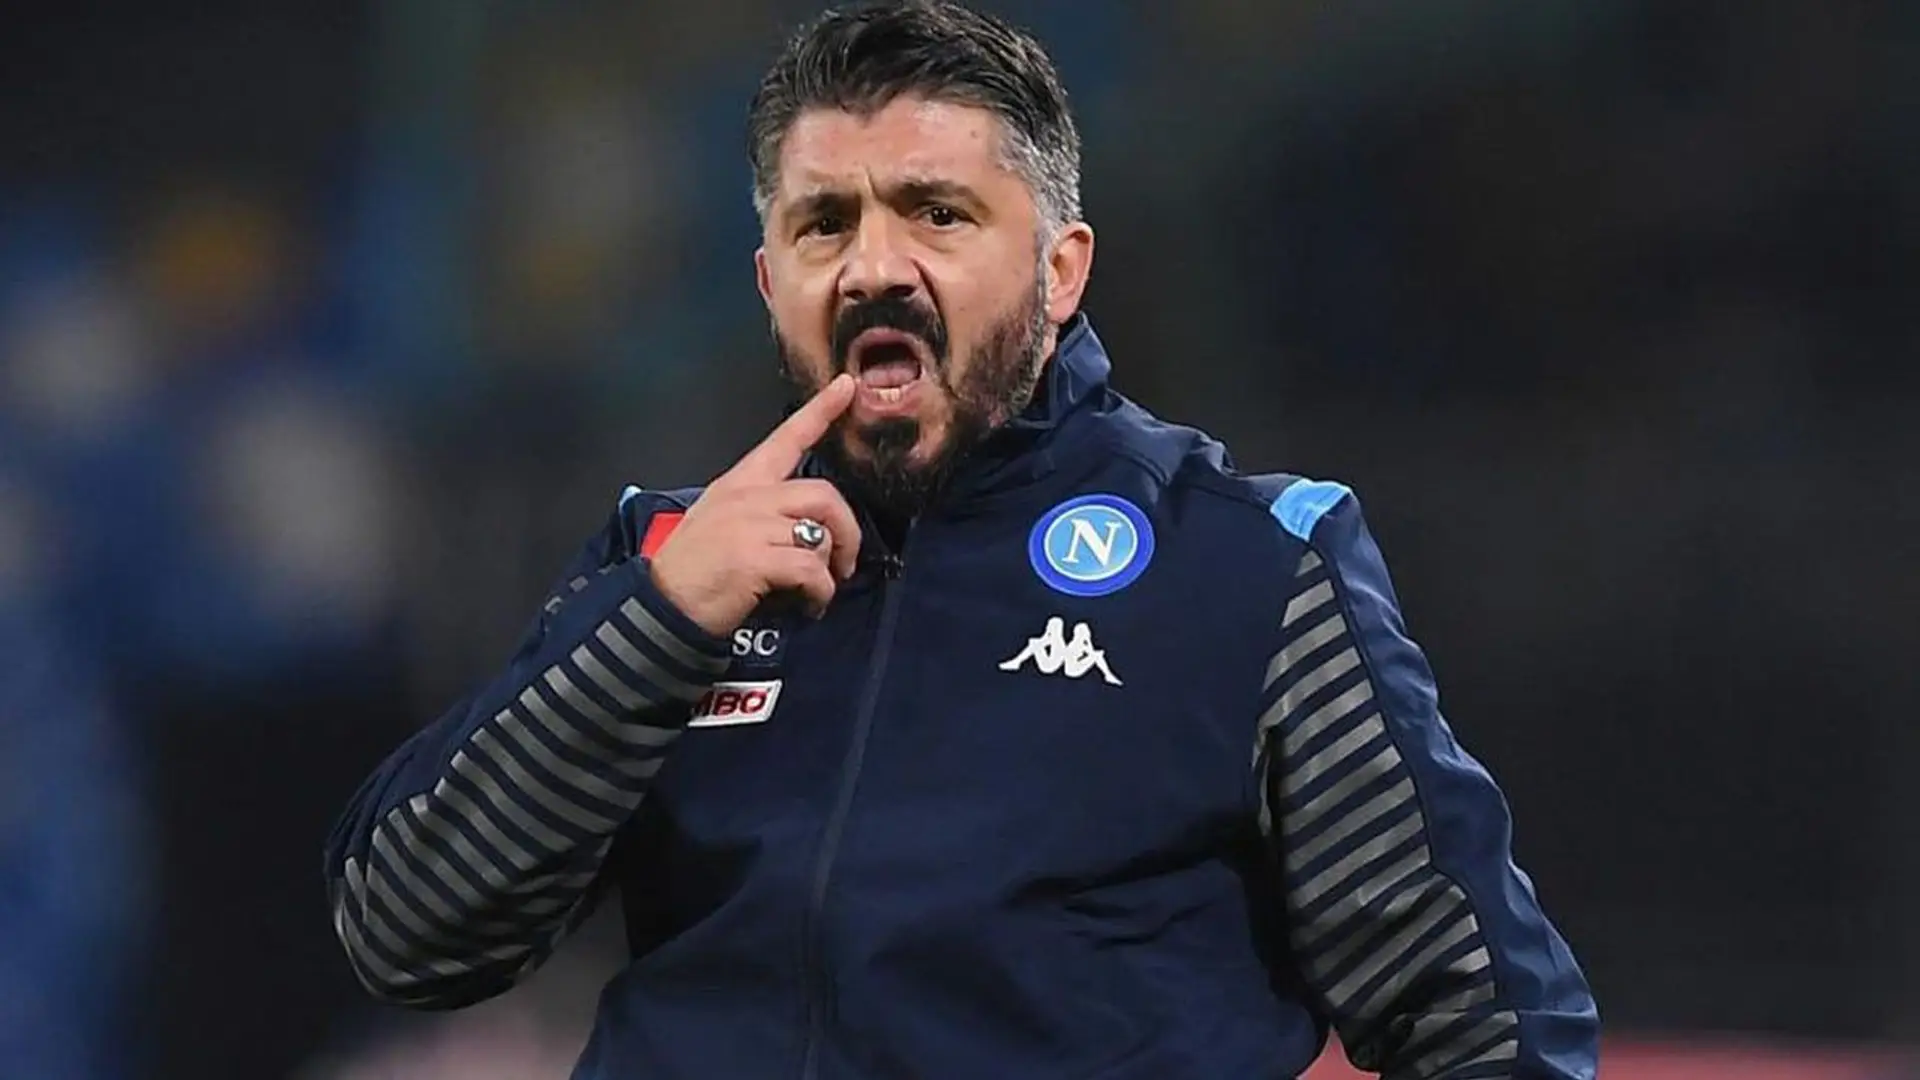 From mid-table to Europa League spot: How Gennaro Gattuso lifted Napoli from abyss this season 